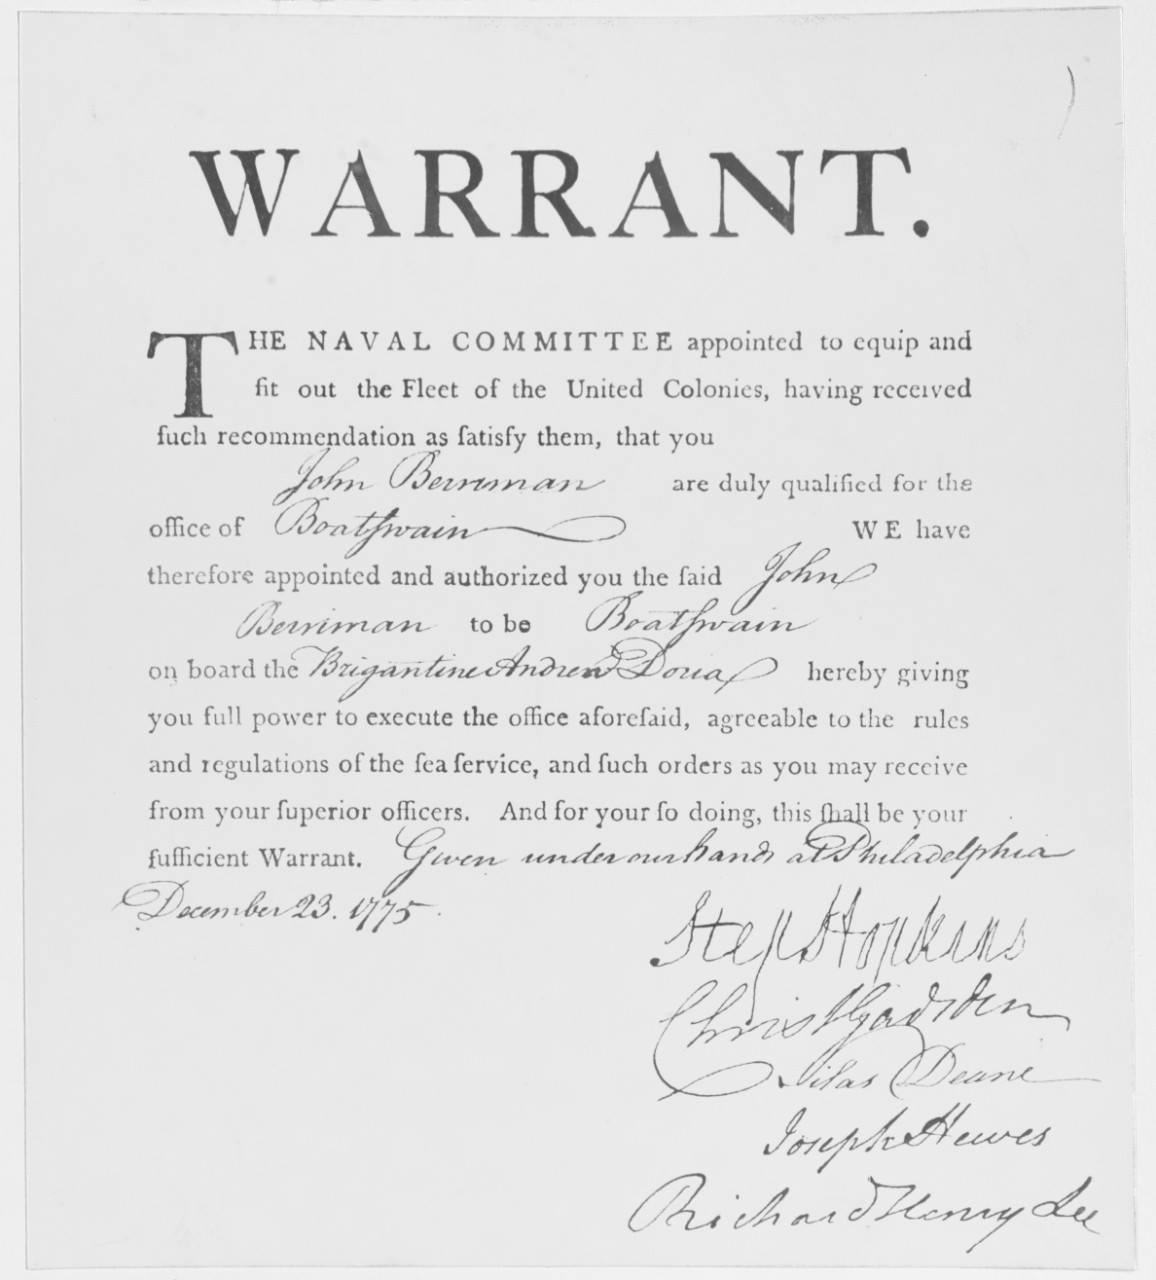 First CWO Warrant